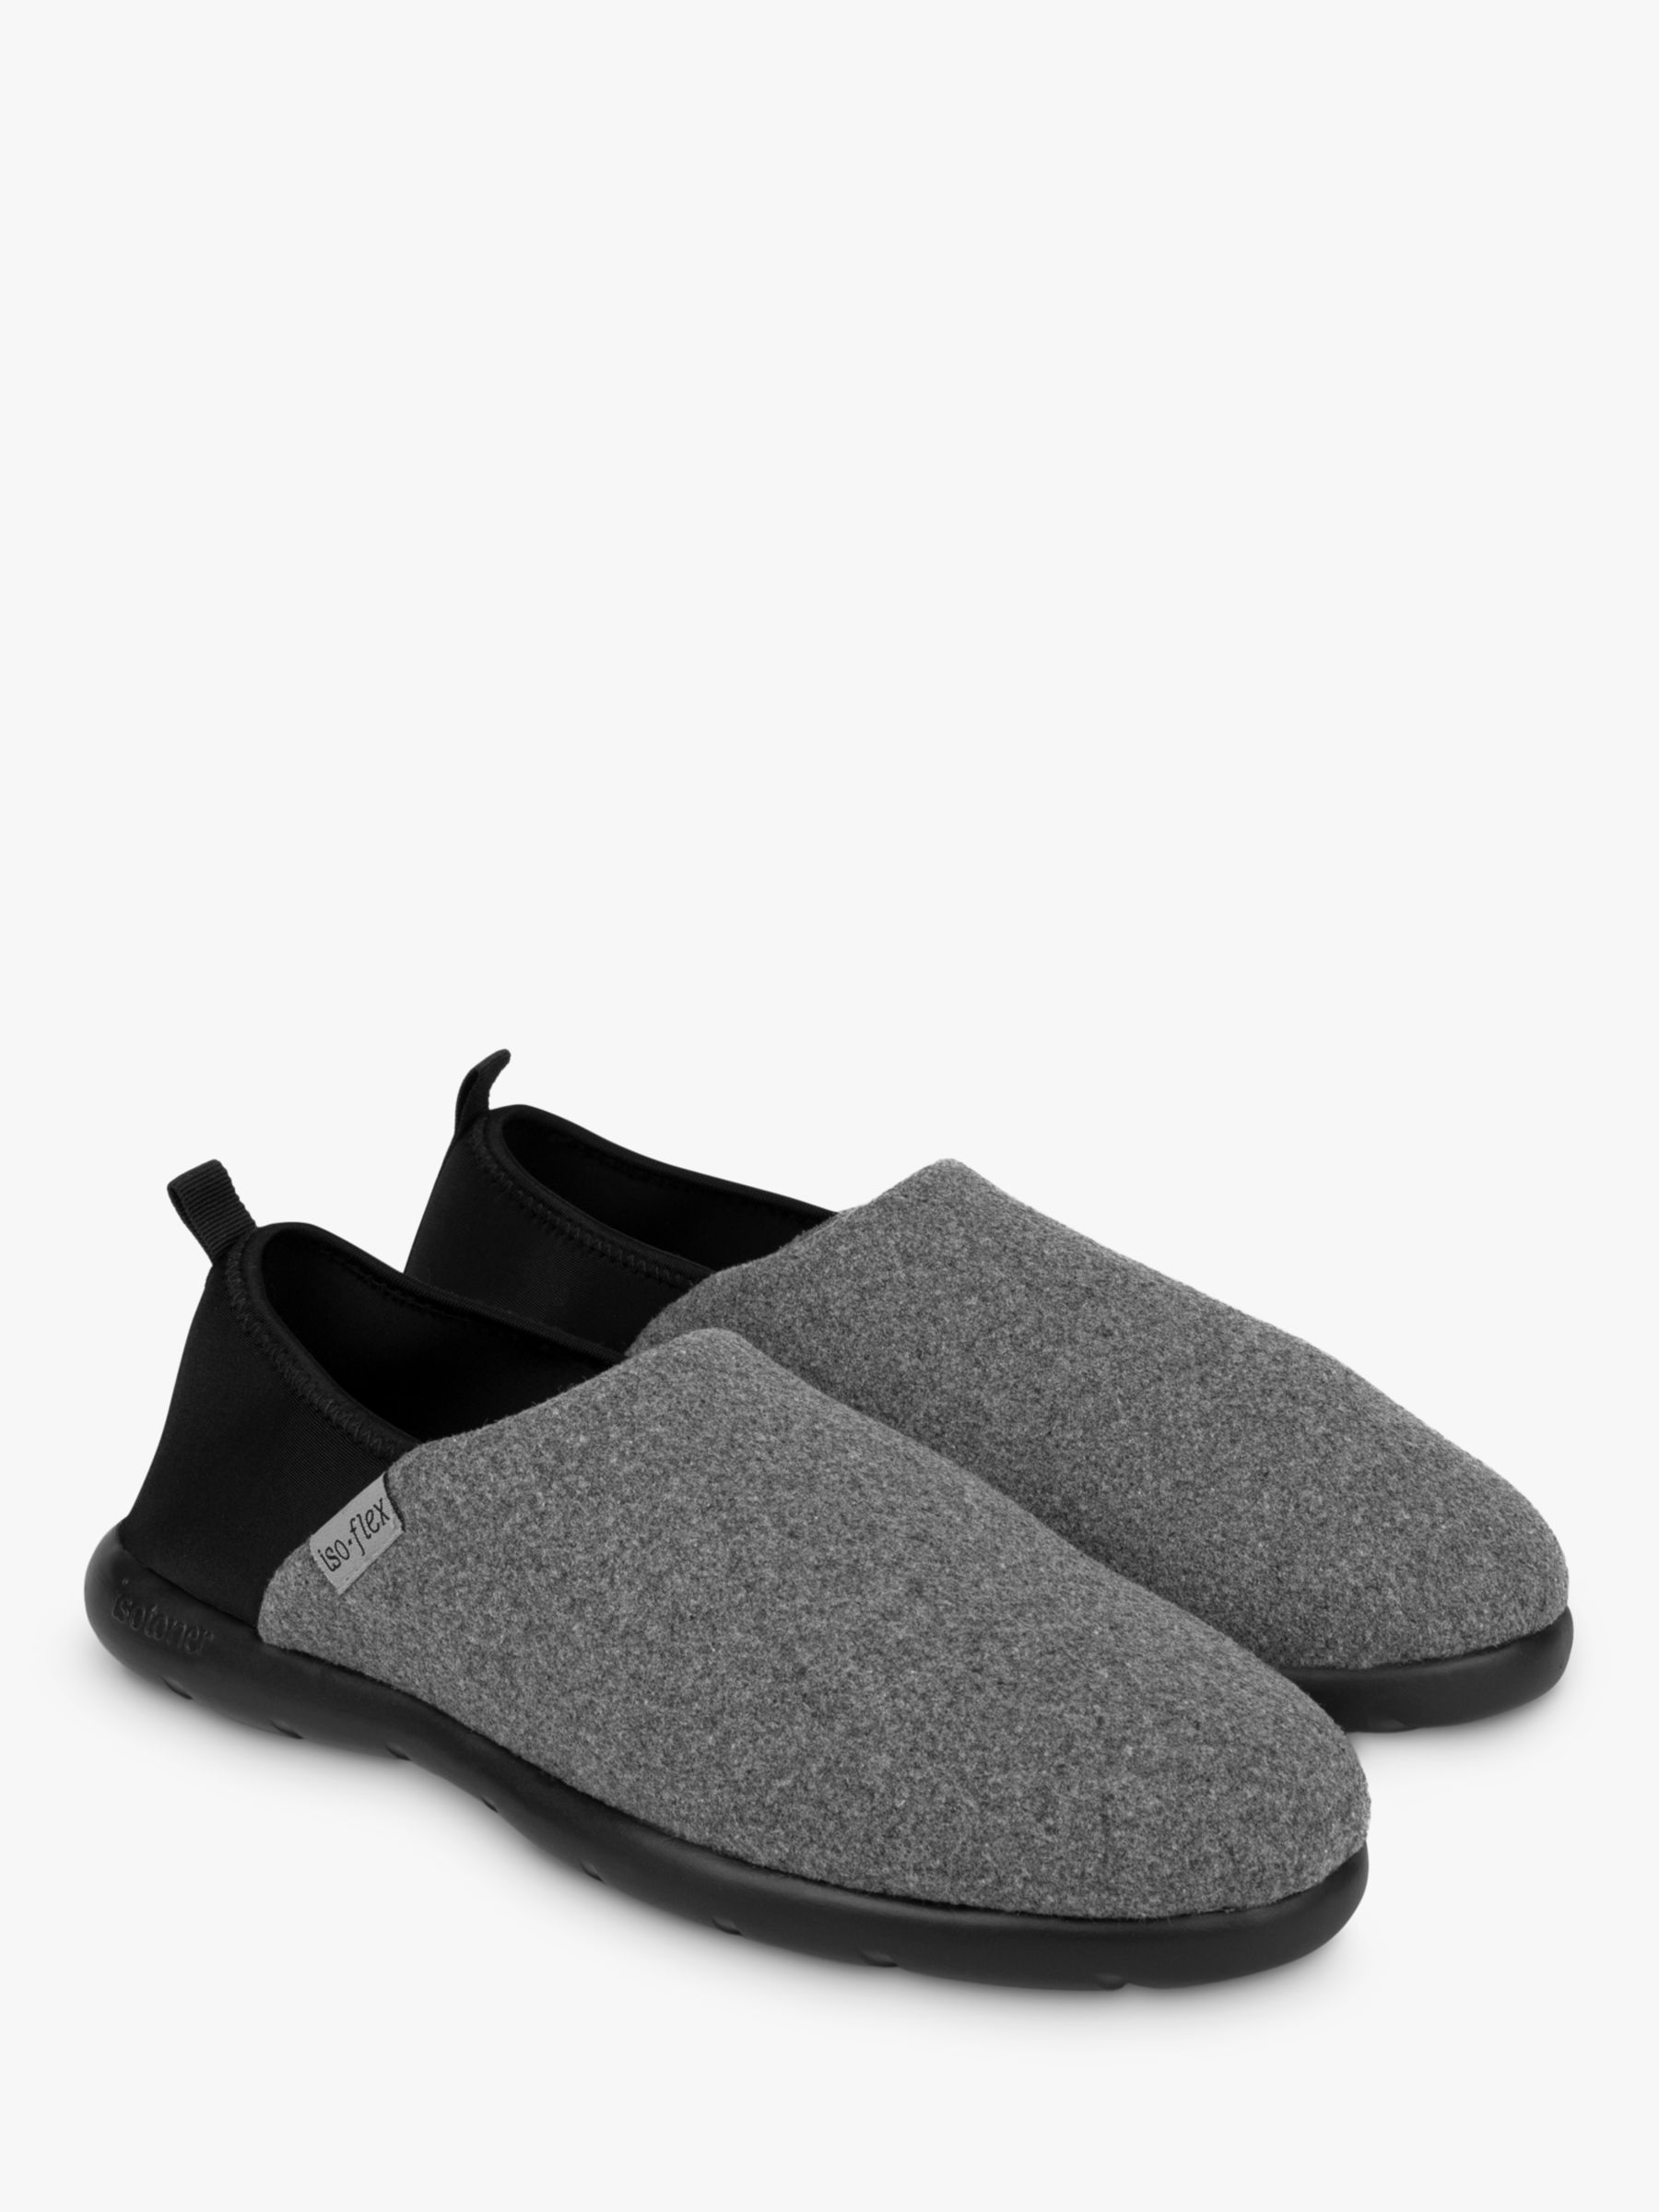 totes Iso Flex Textured Colour Block Mule Slippers, Grey/Black, 8